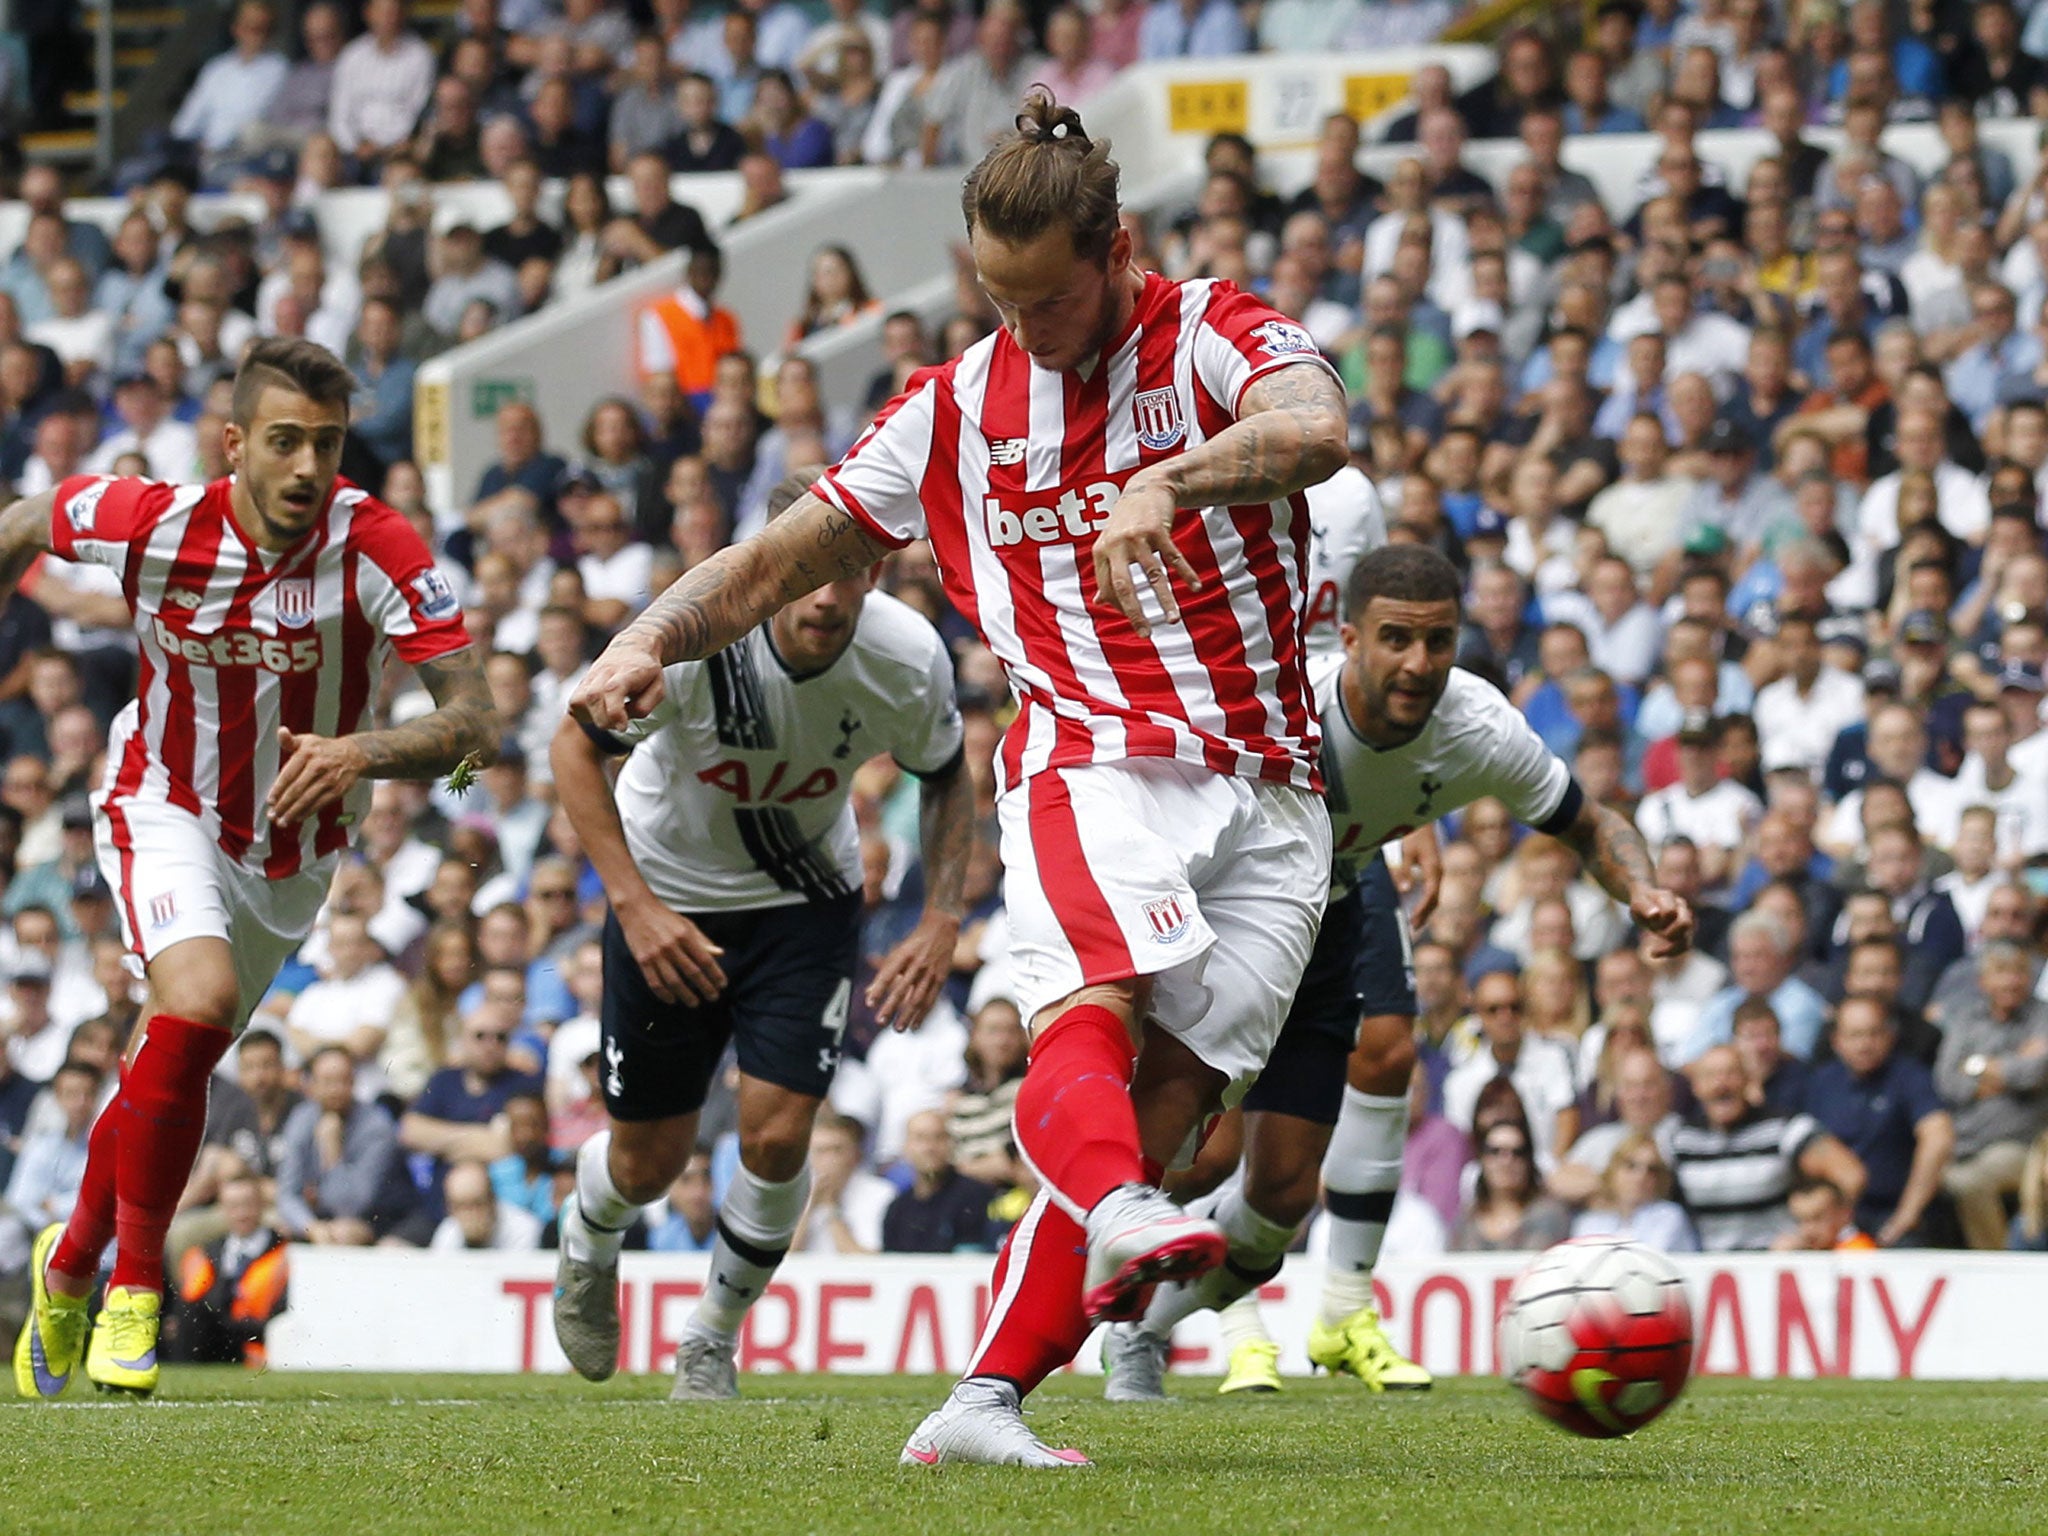 Marko Arnautovic scored from the penalty spot to make 2-1